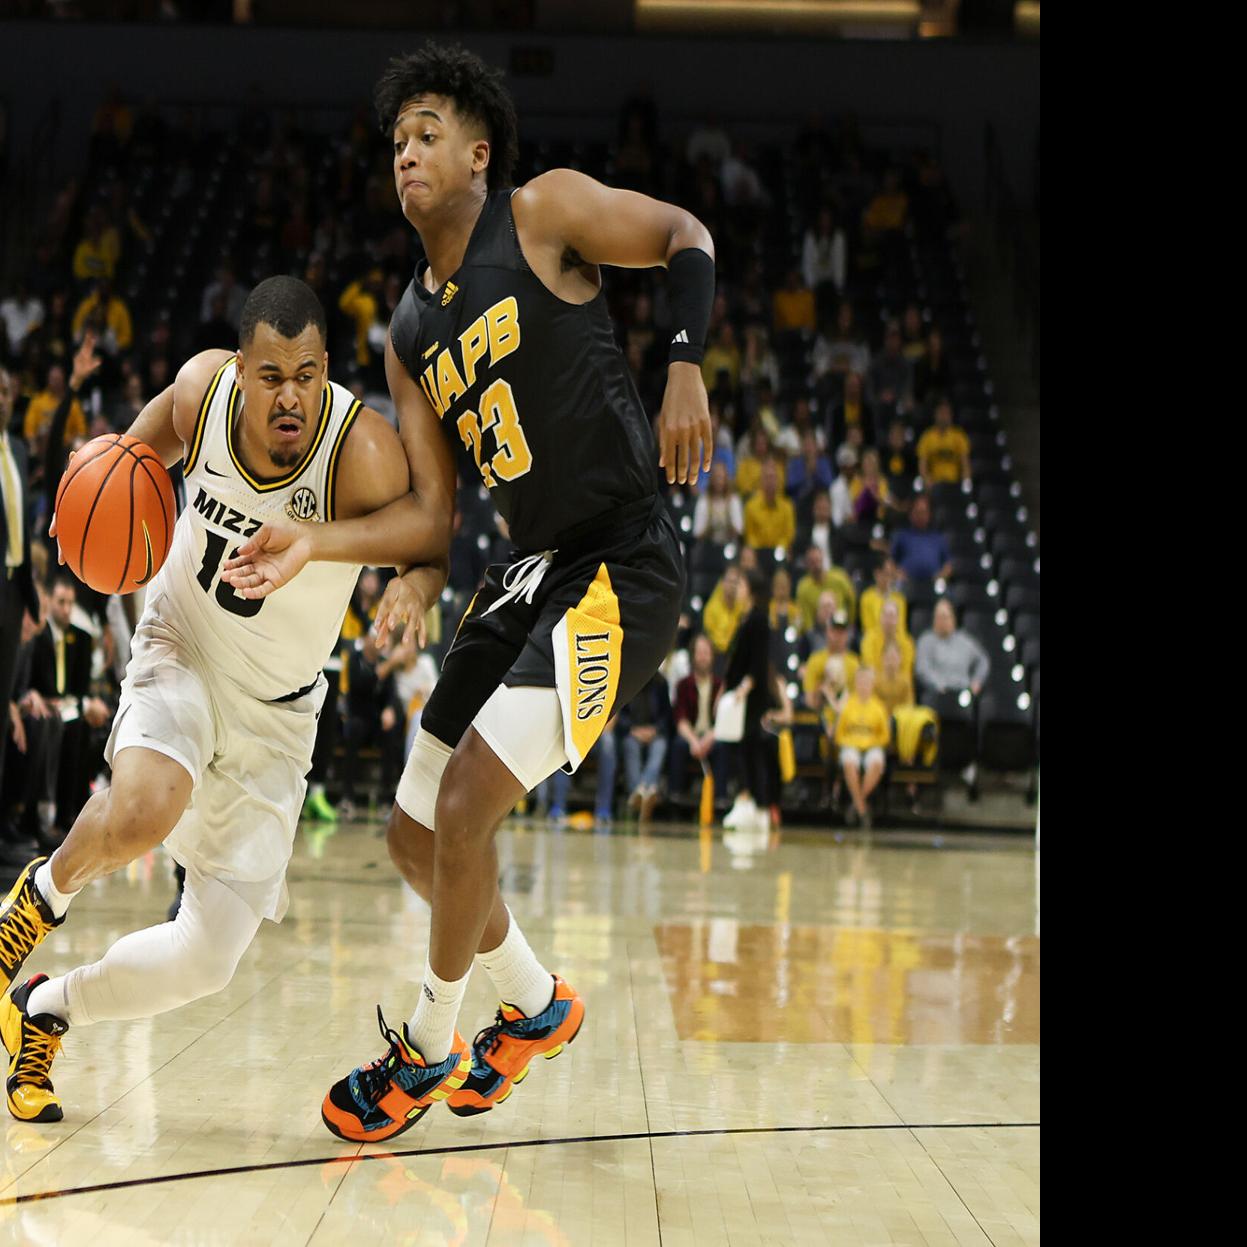 Match with Memphis allows for early test for MU basketball